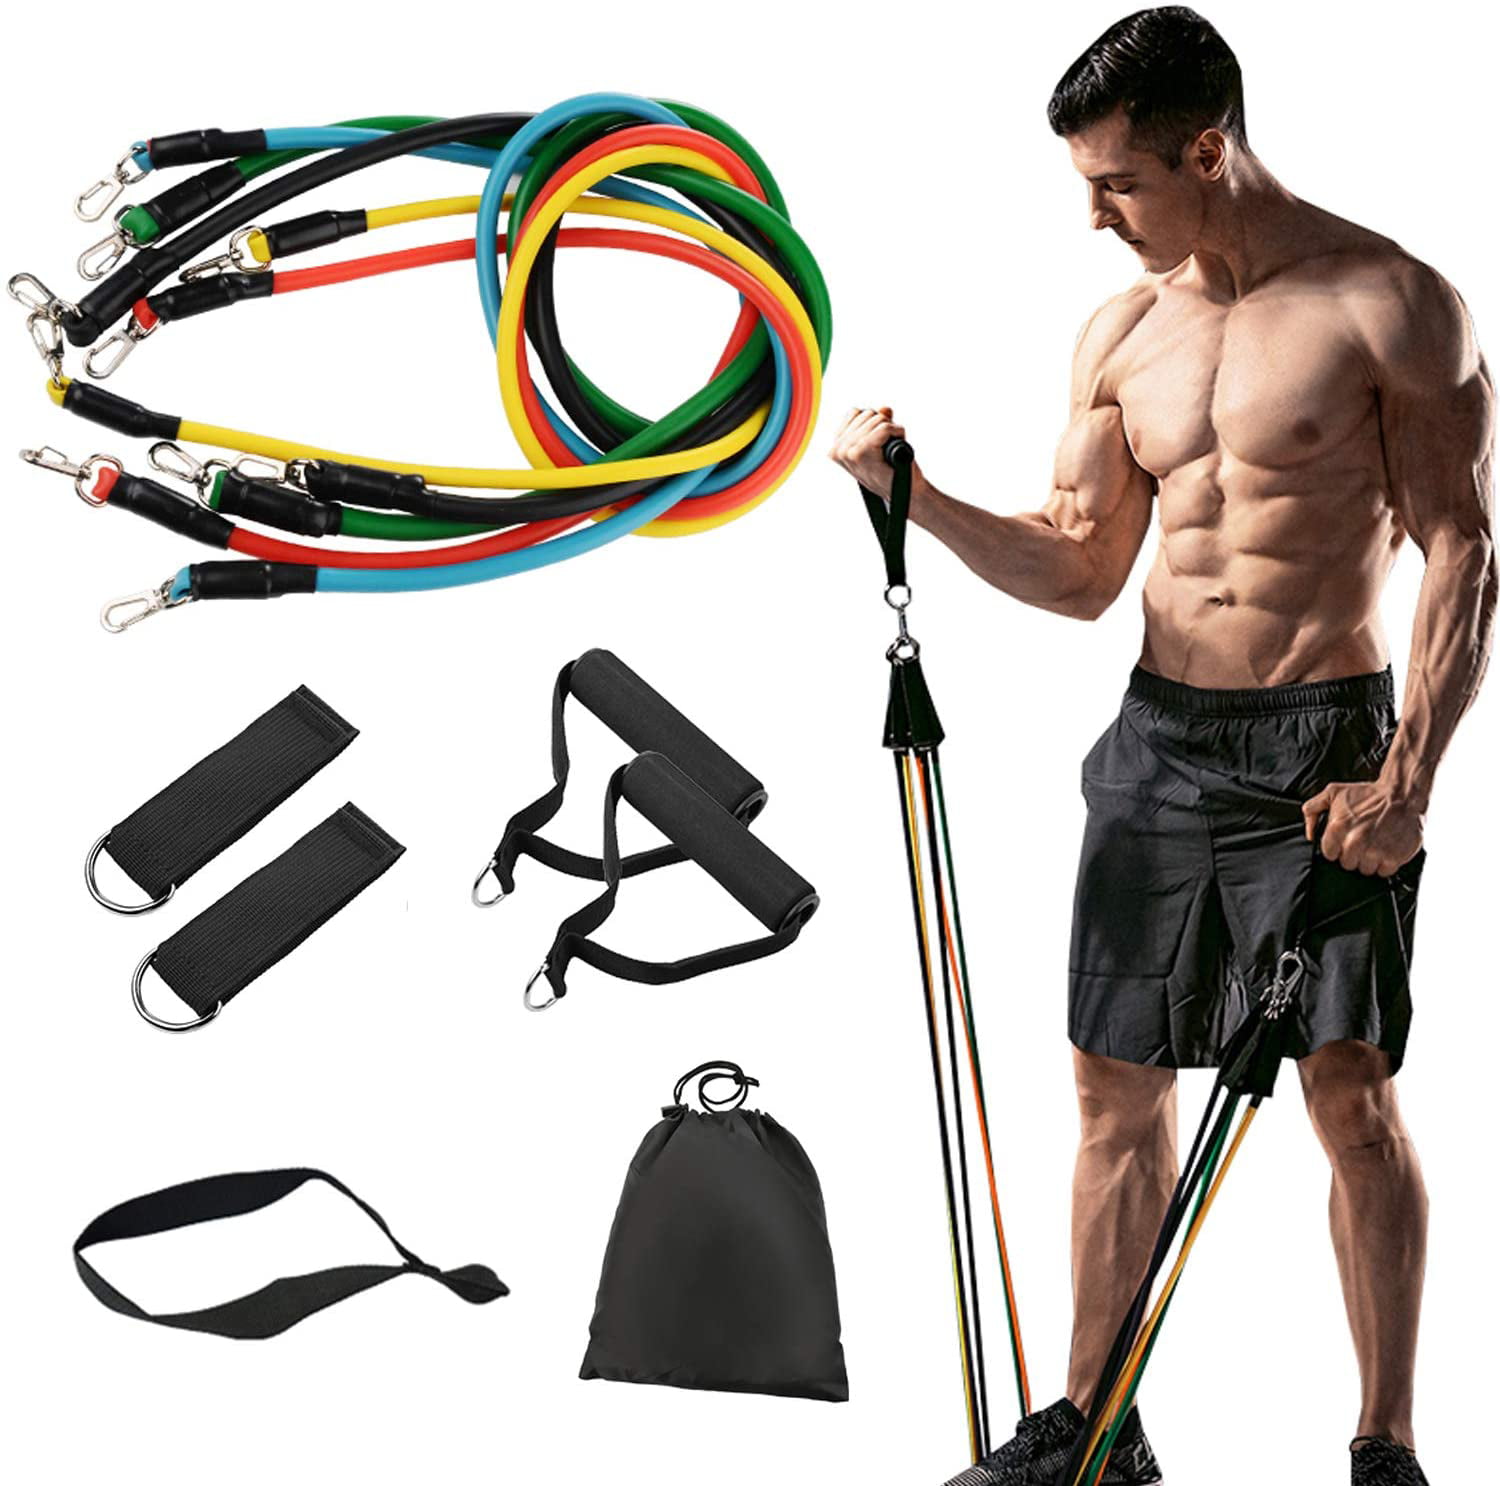 11Pcs Resistance Bands For Home Workout Exercise Yoga outdoor Fitness Training 